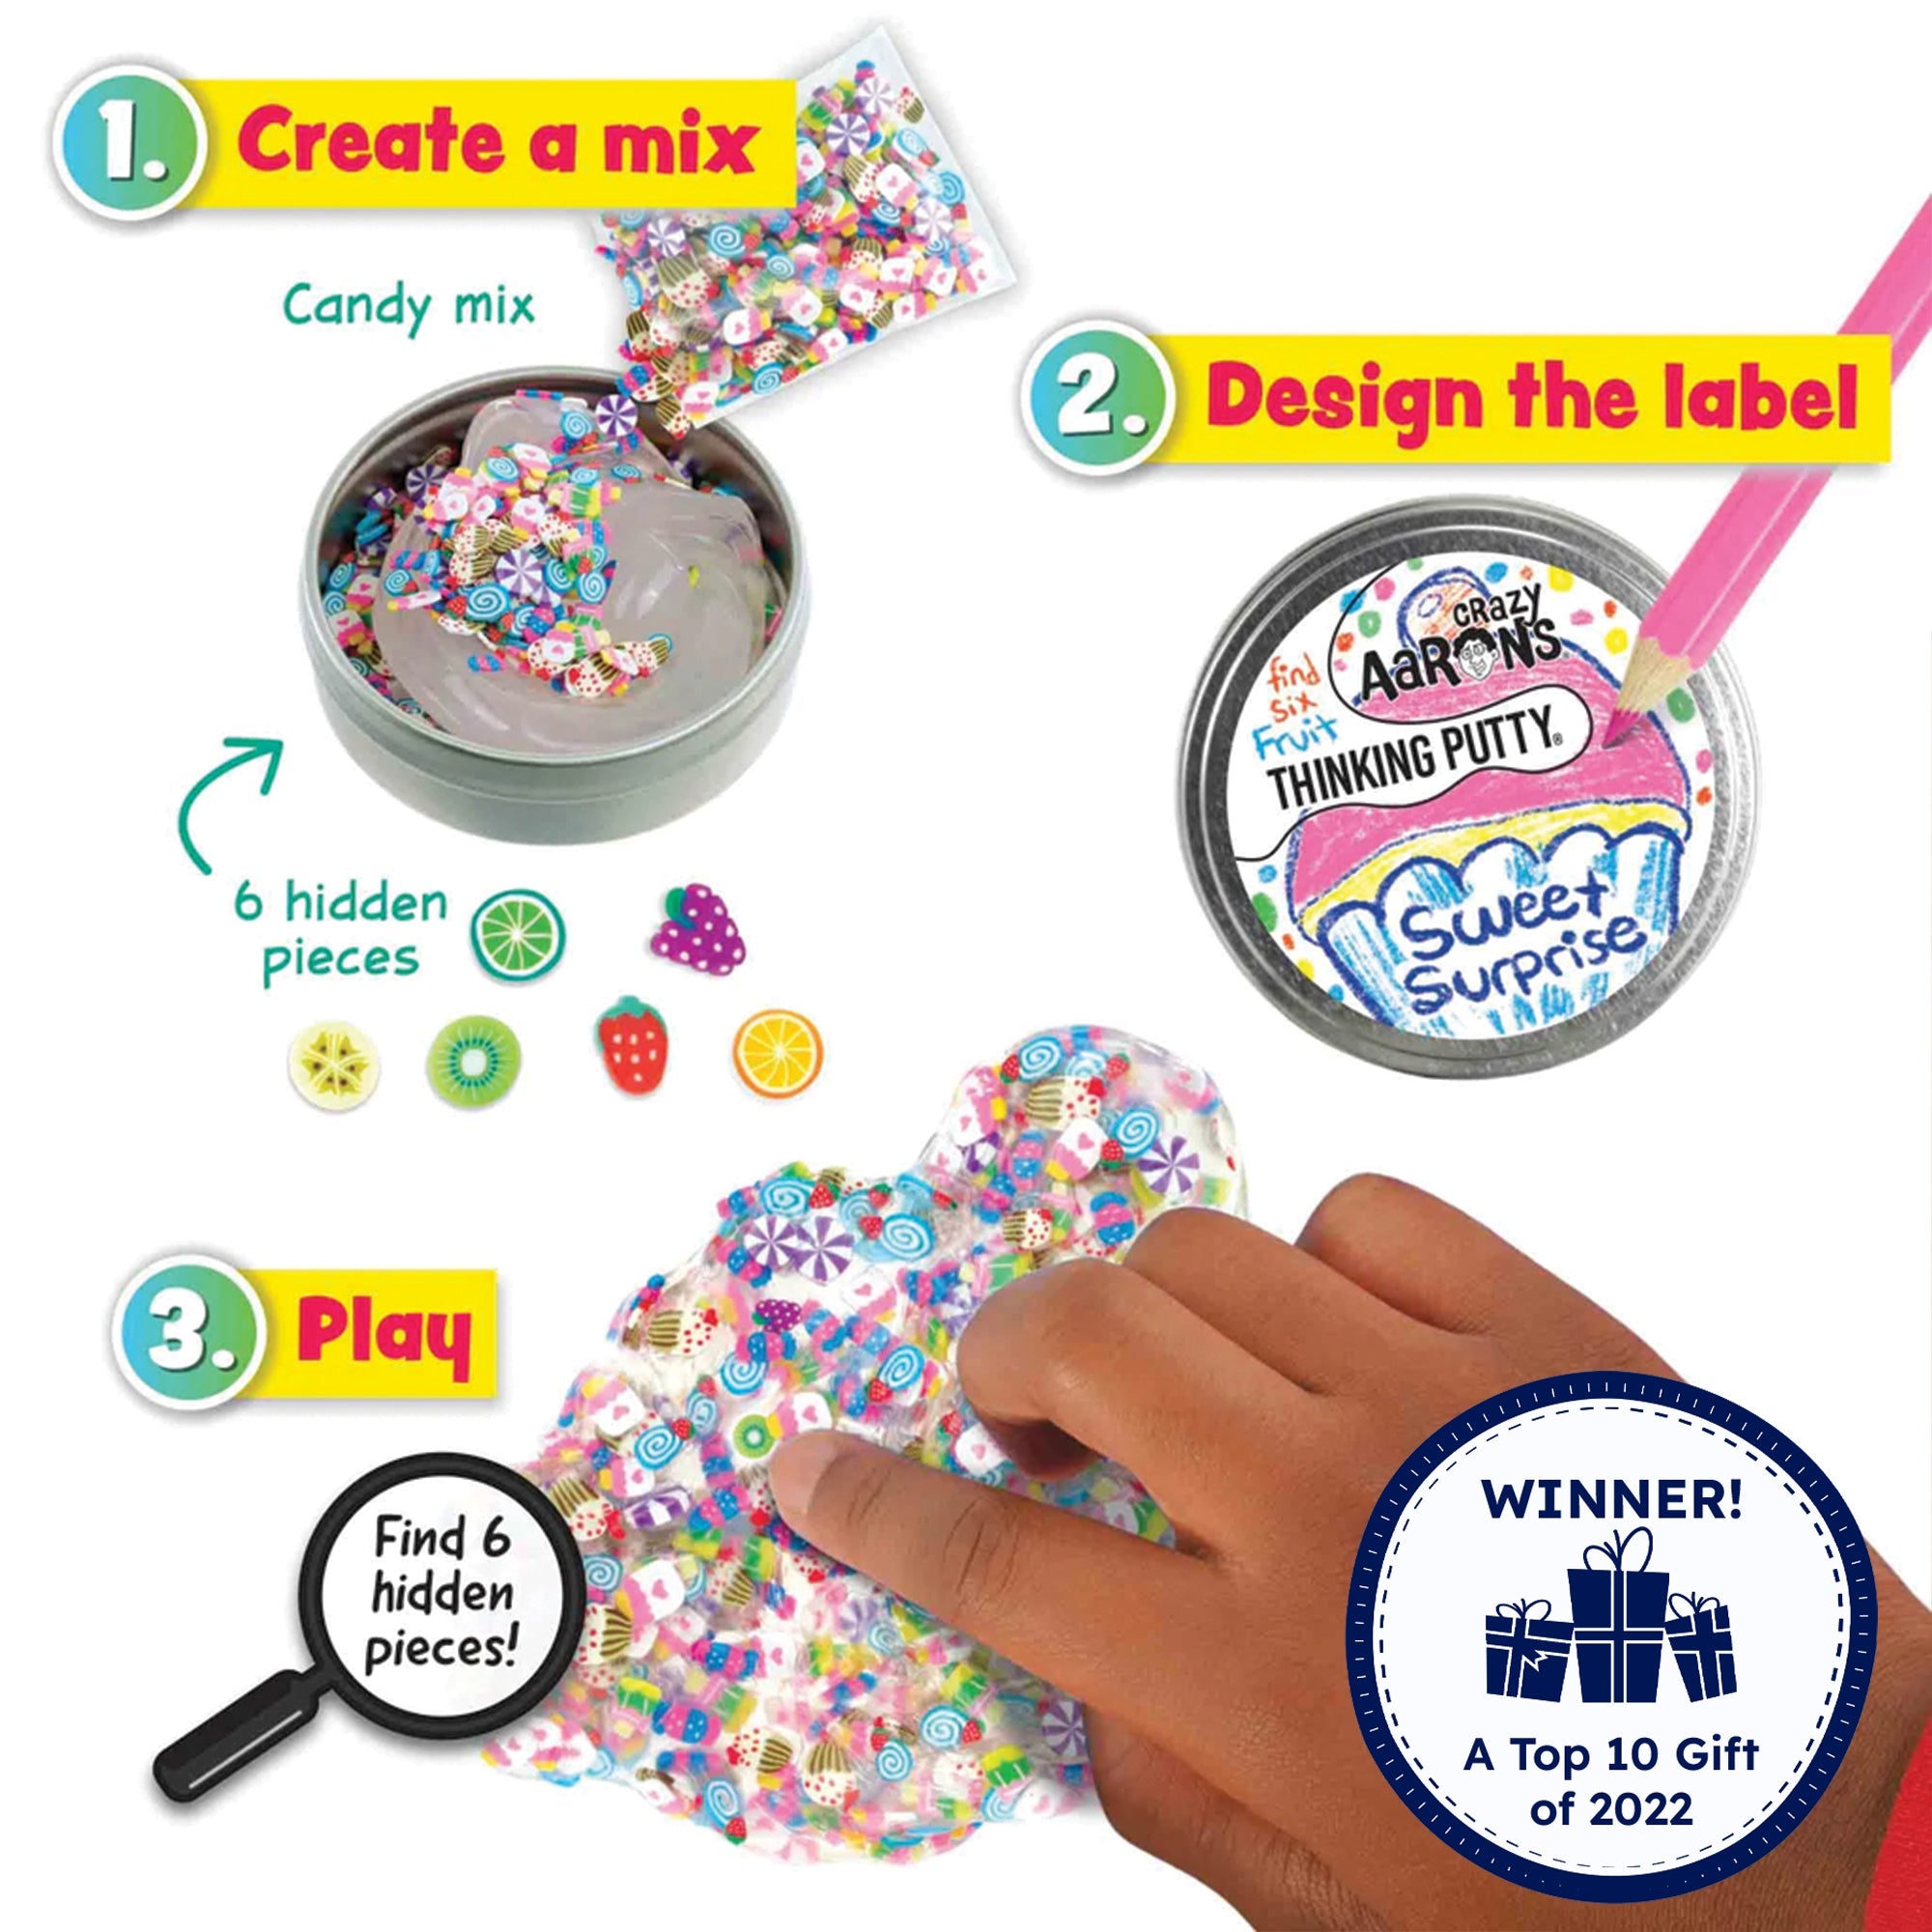 Mixed By Me Hide Inside Thinking Putty Kit. The image shows 3 how to steps. 1, create a mix. You mix the candy and fruit pieces inside the clear putty in the tin. 2, design the label. It shows a pink colored pencil drawing a cupcake on the label on the tin lid with the words “sweet surprise.” 3, play. It shows a hand playing with the mixed putty, pointing out a kiwi fruit among the candy pieces. A magnifying glass in the lower-left directs you to “find 6 hidden pieces.” Timberdoodle award winner.